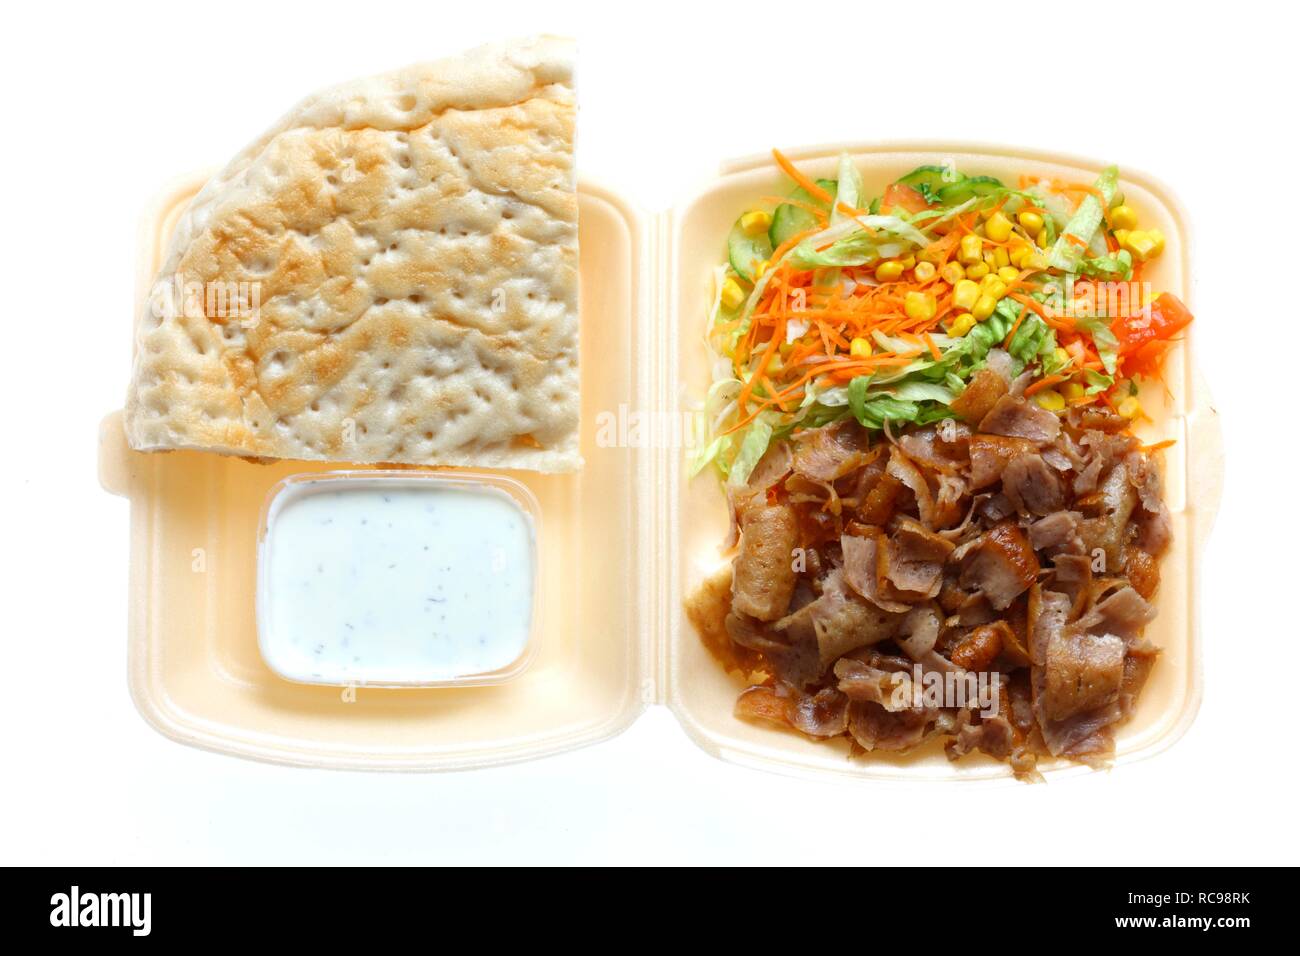 Fast food, doner kebab plate, with doner meat, salad, garlic-yogurt sauce and pita bread in plastic takeaway packaging Stock Photo